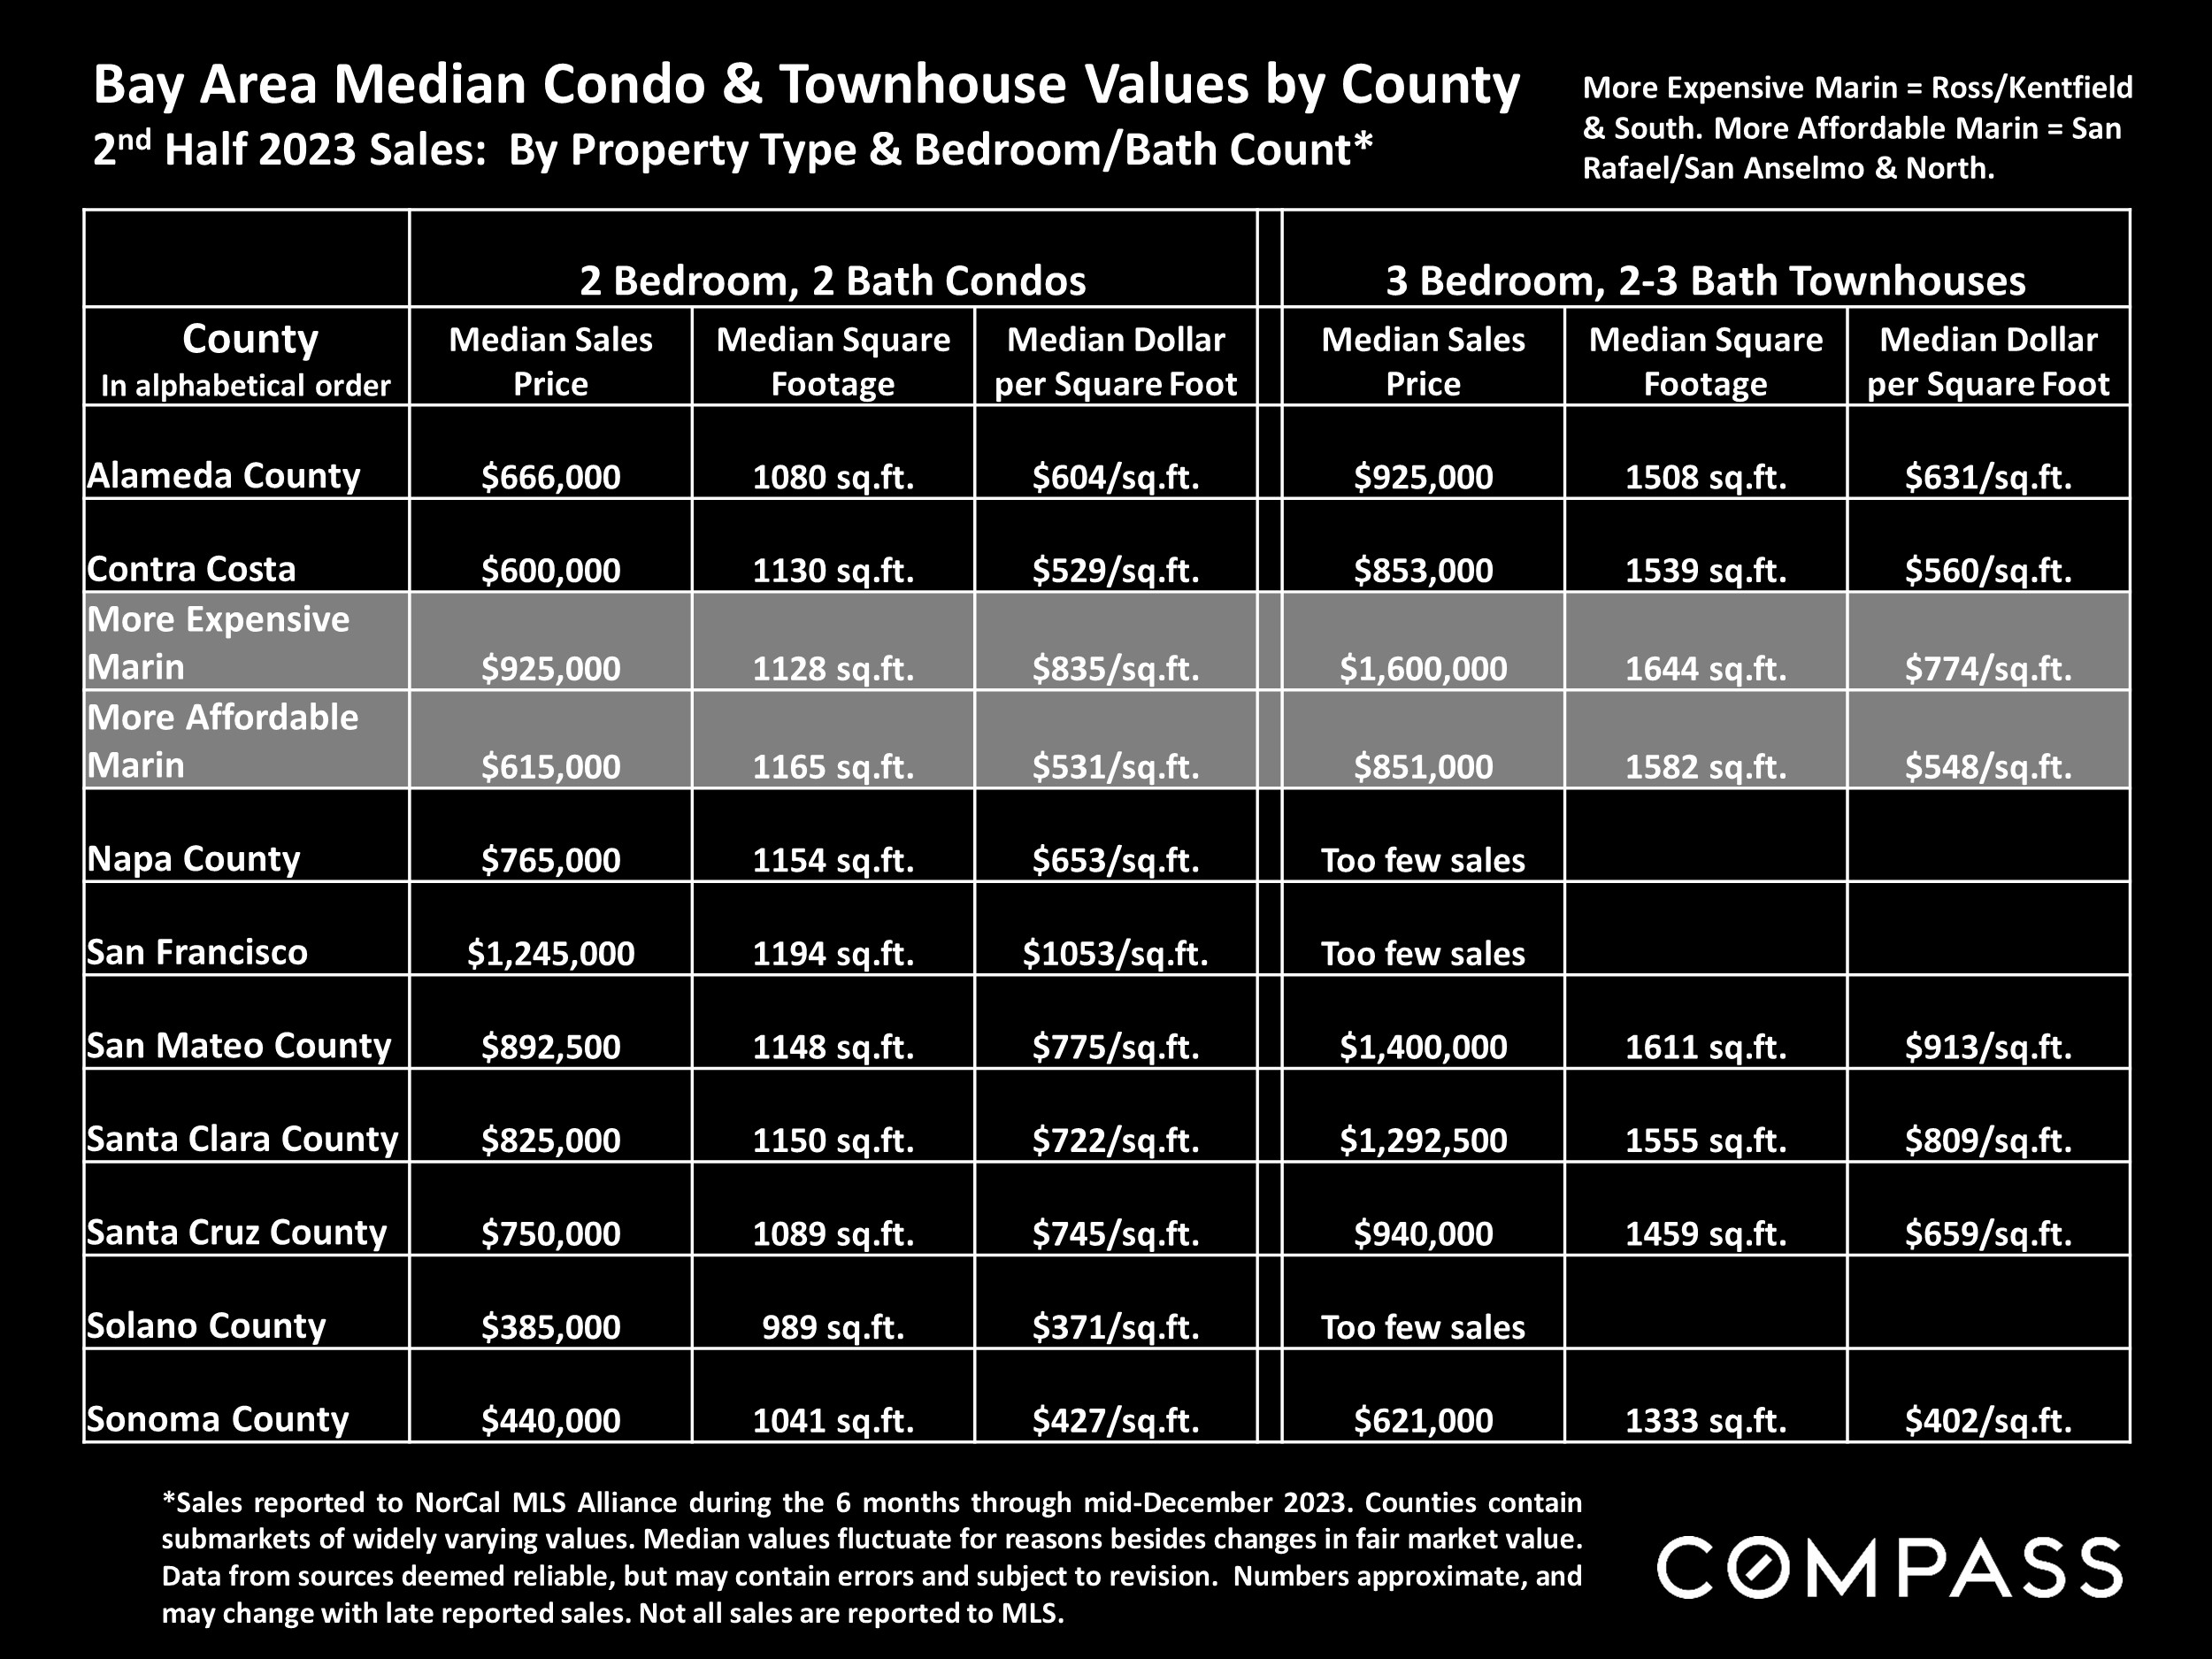 Bay Area Median Condo & Townhouse Values by County 2nd Half 2023 Sales: By Property Type & Bedroom/Bath Count*